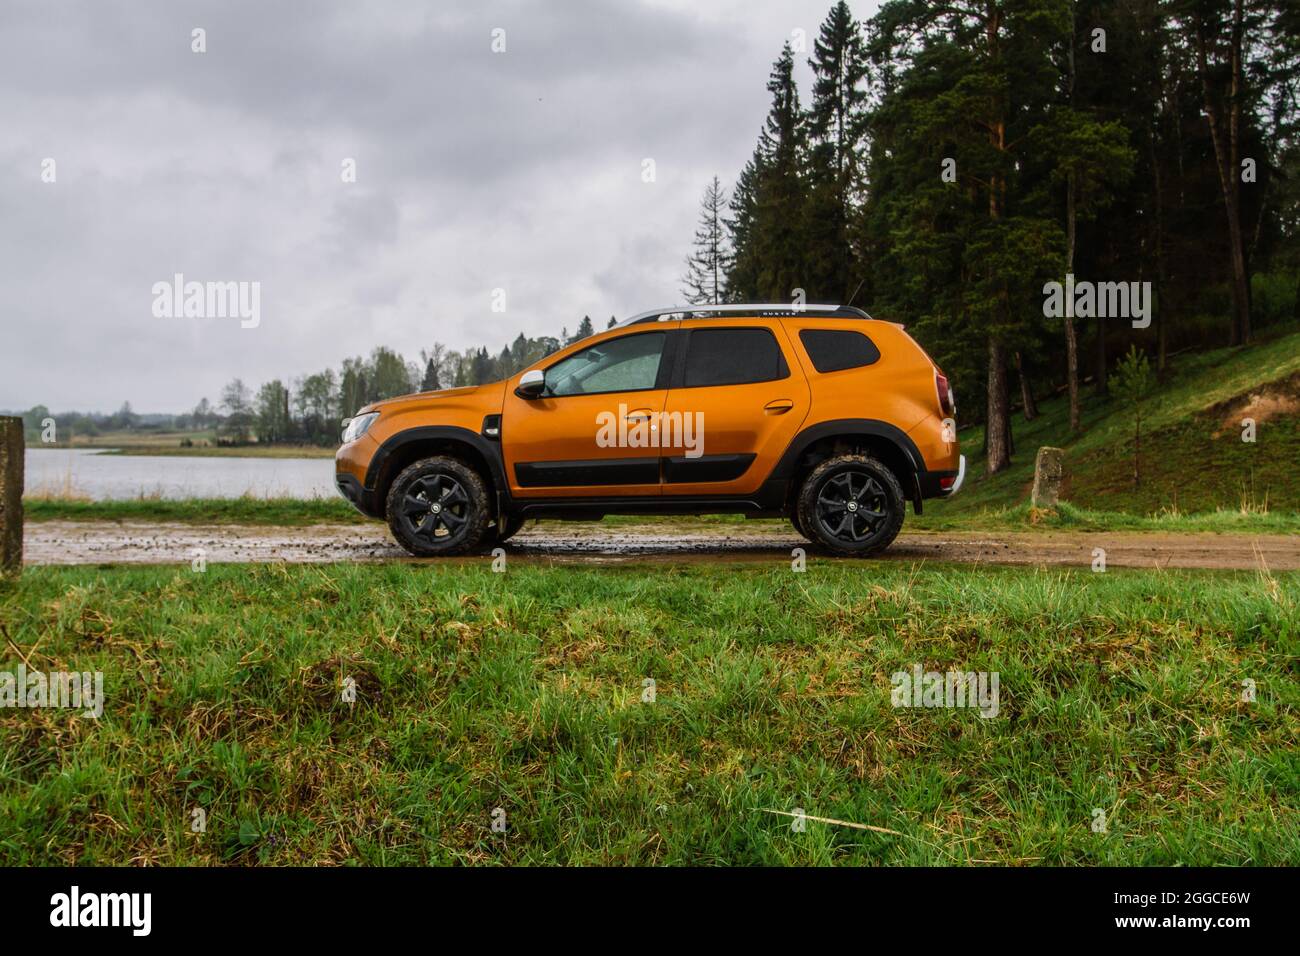 Dacia Duster - Tuning The Dacia Duster project was born out of